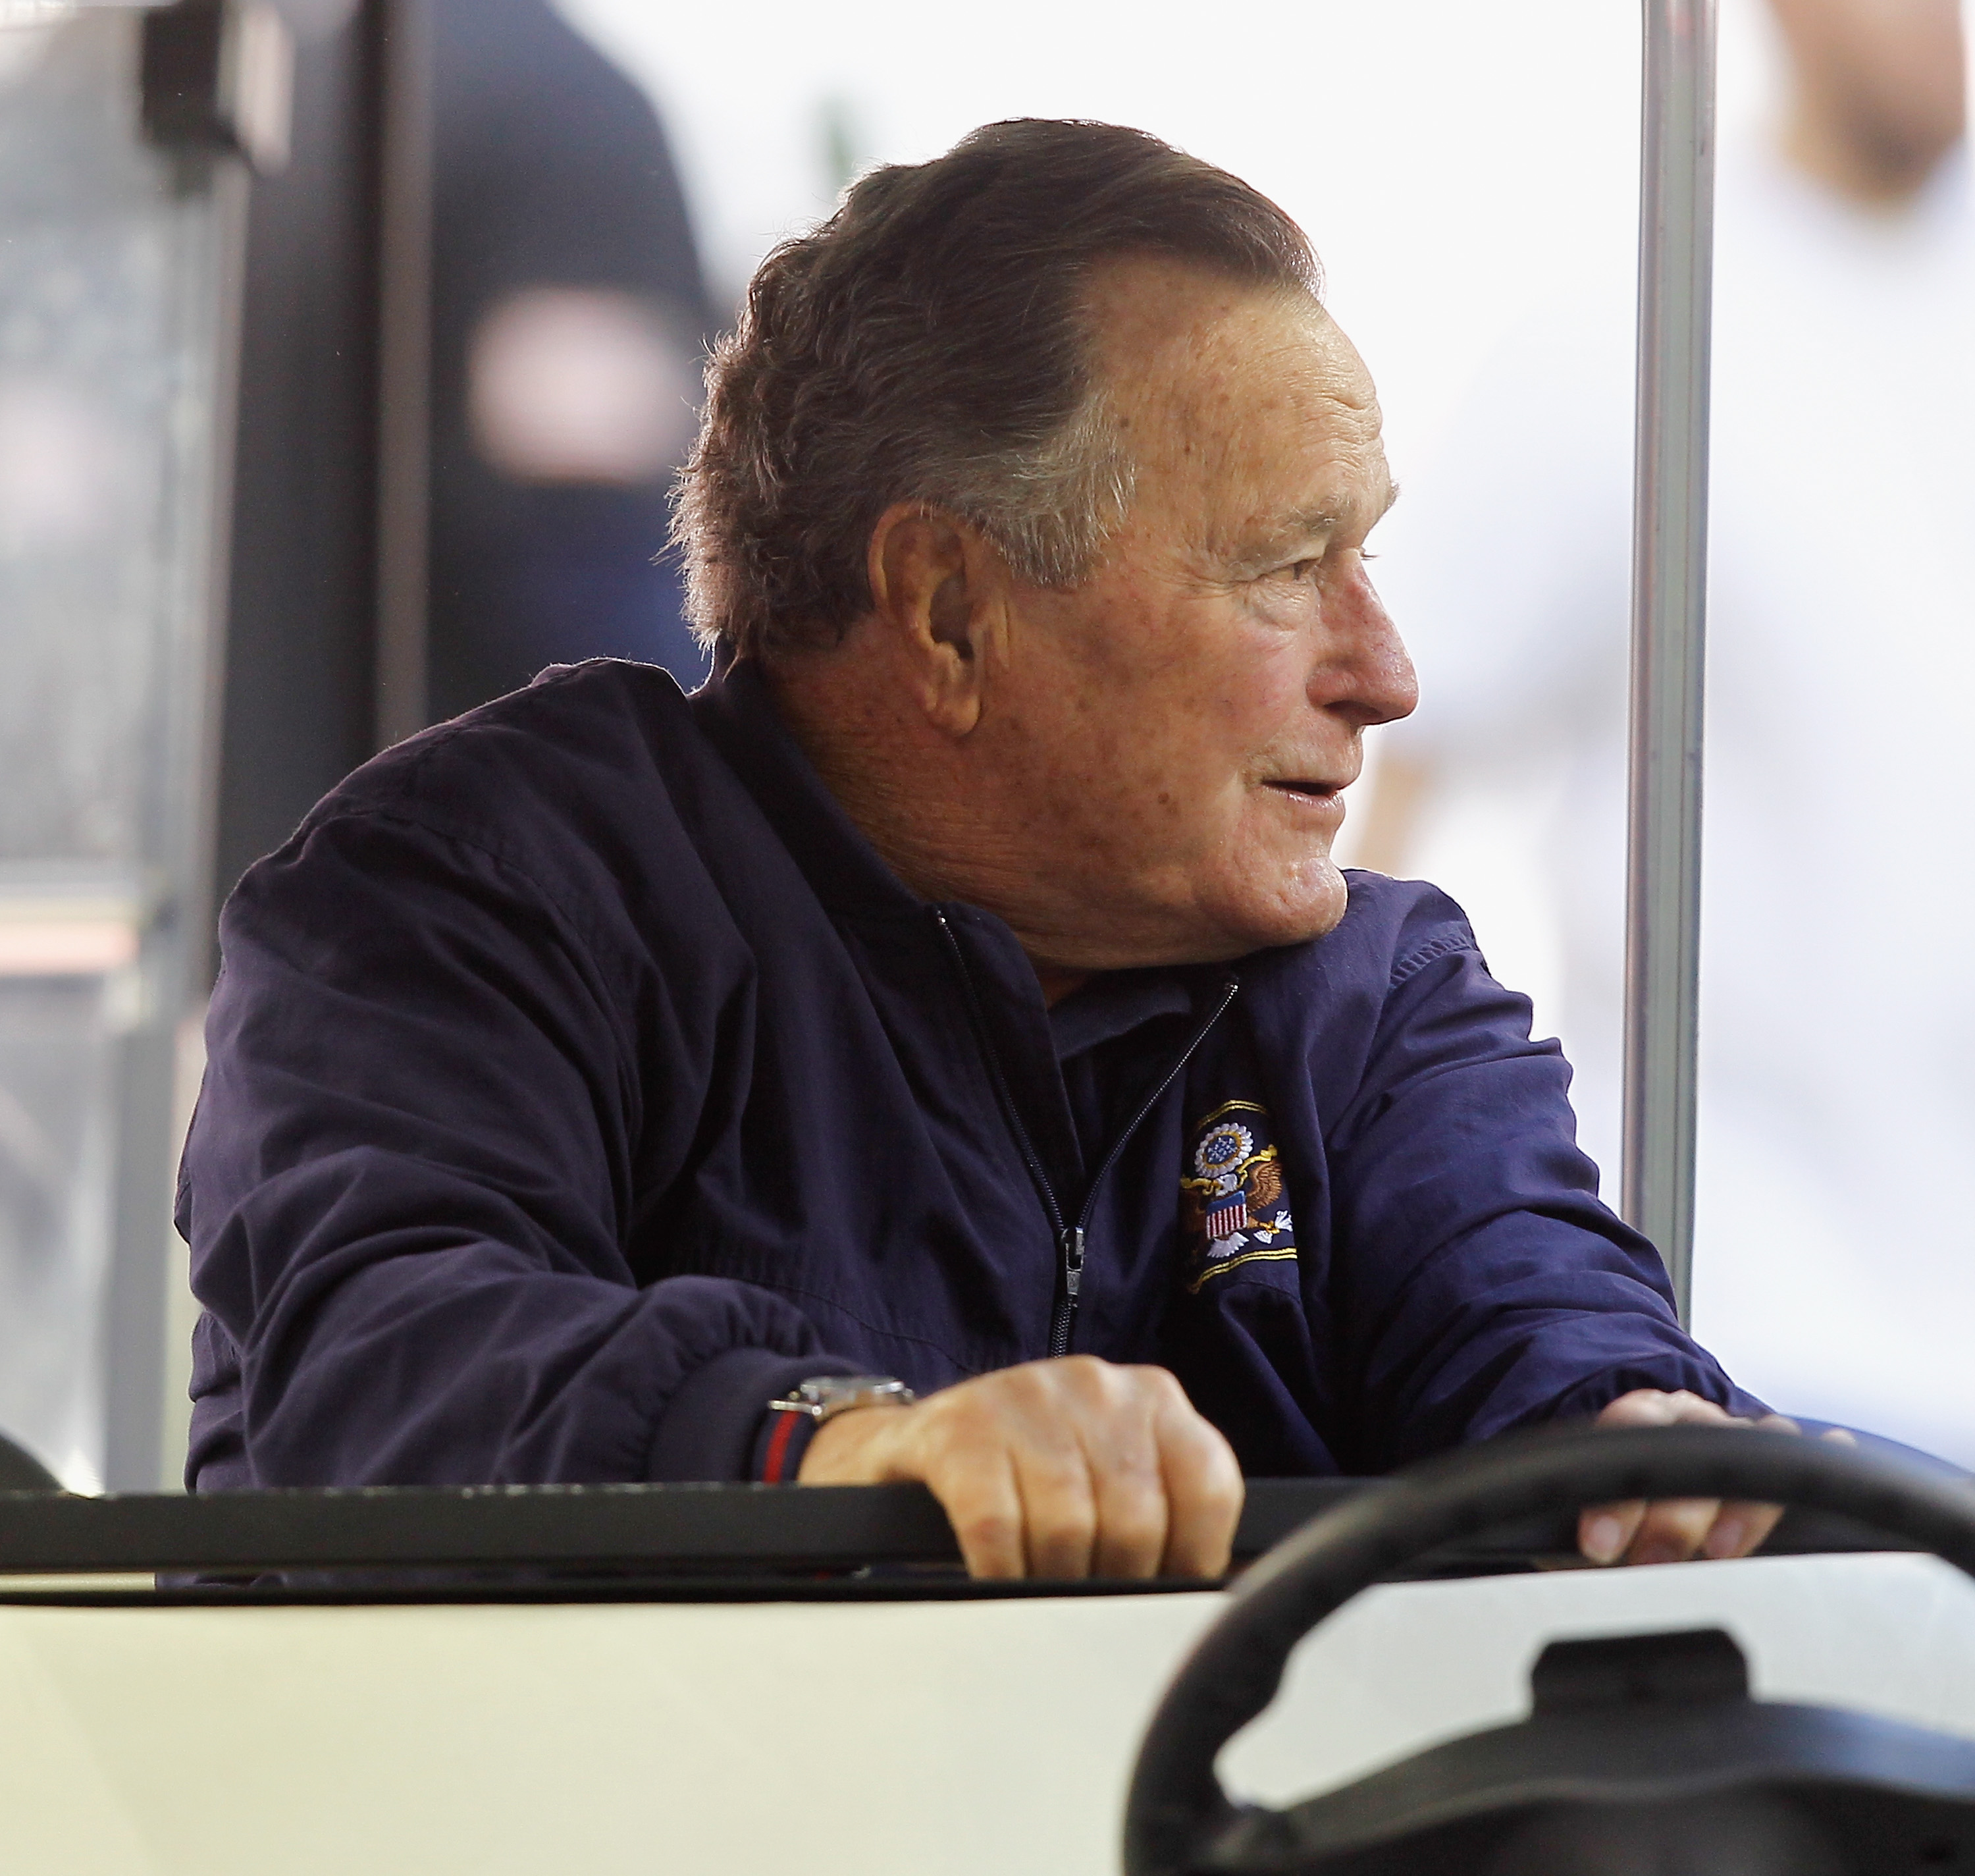 Former President George H.W. Bush attends a game between the Cincinnati Bengals and Houston Texans at NRG Stadium on November 23, 2014 in Houston, Texas. (Bob Levey—Getty Images)